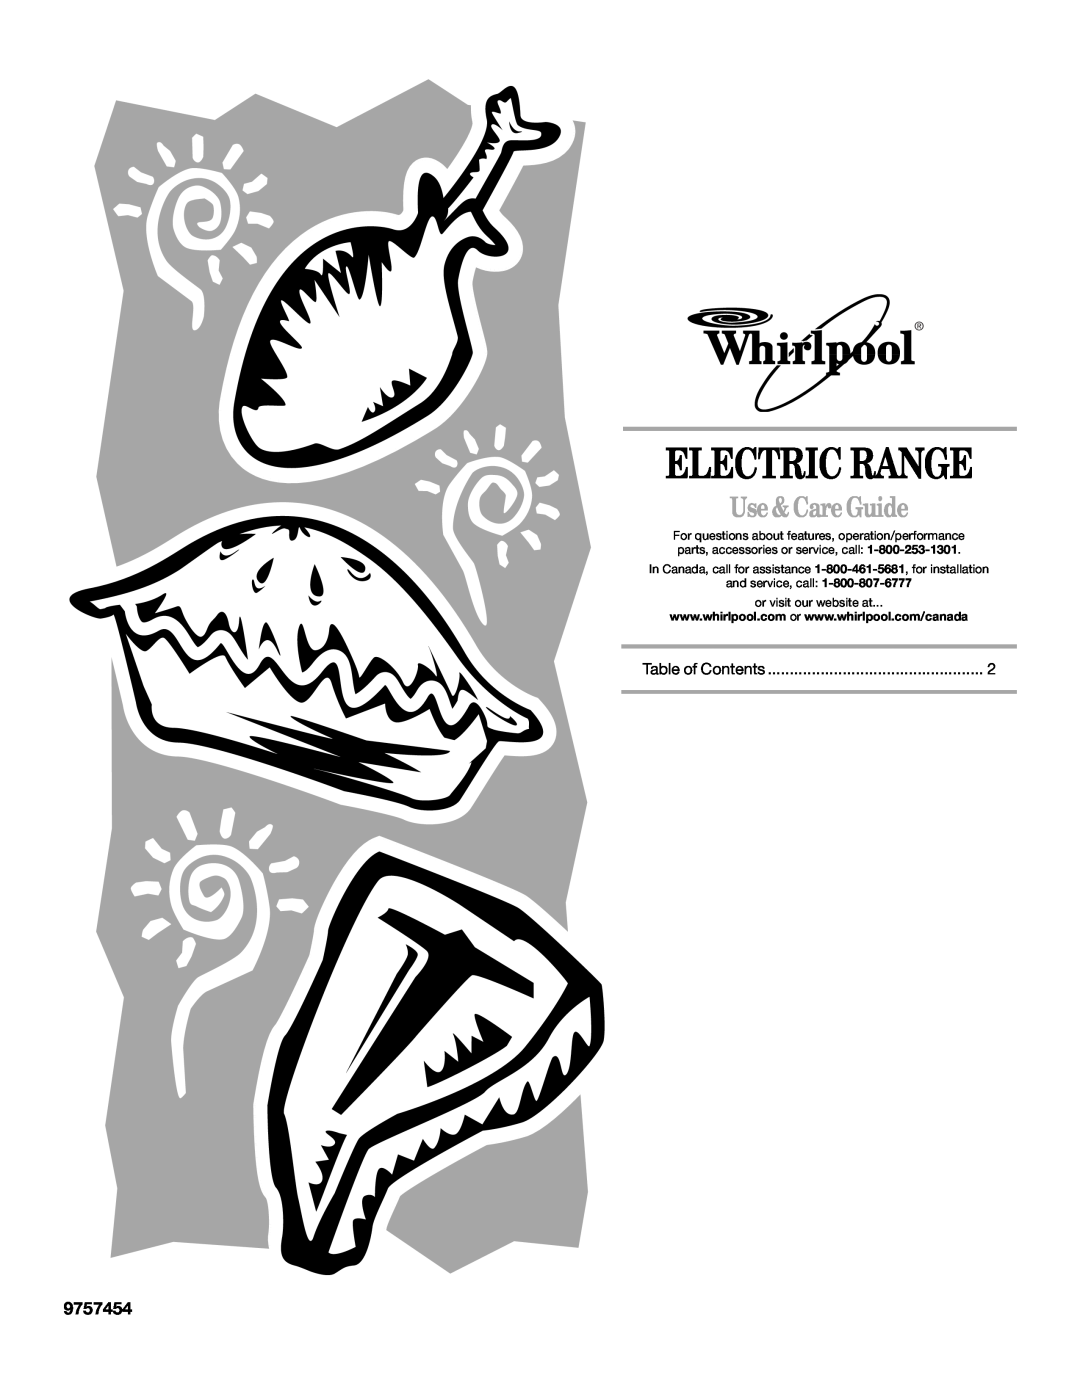 Whirlpool 9757454 manual Electric Range, Use &Care Guide, In Canada, call for assistance 1-800-461-5681, for installation 